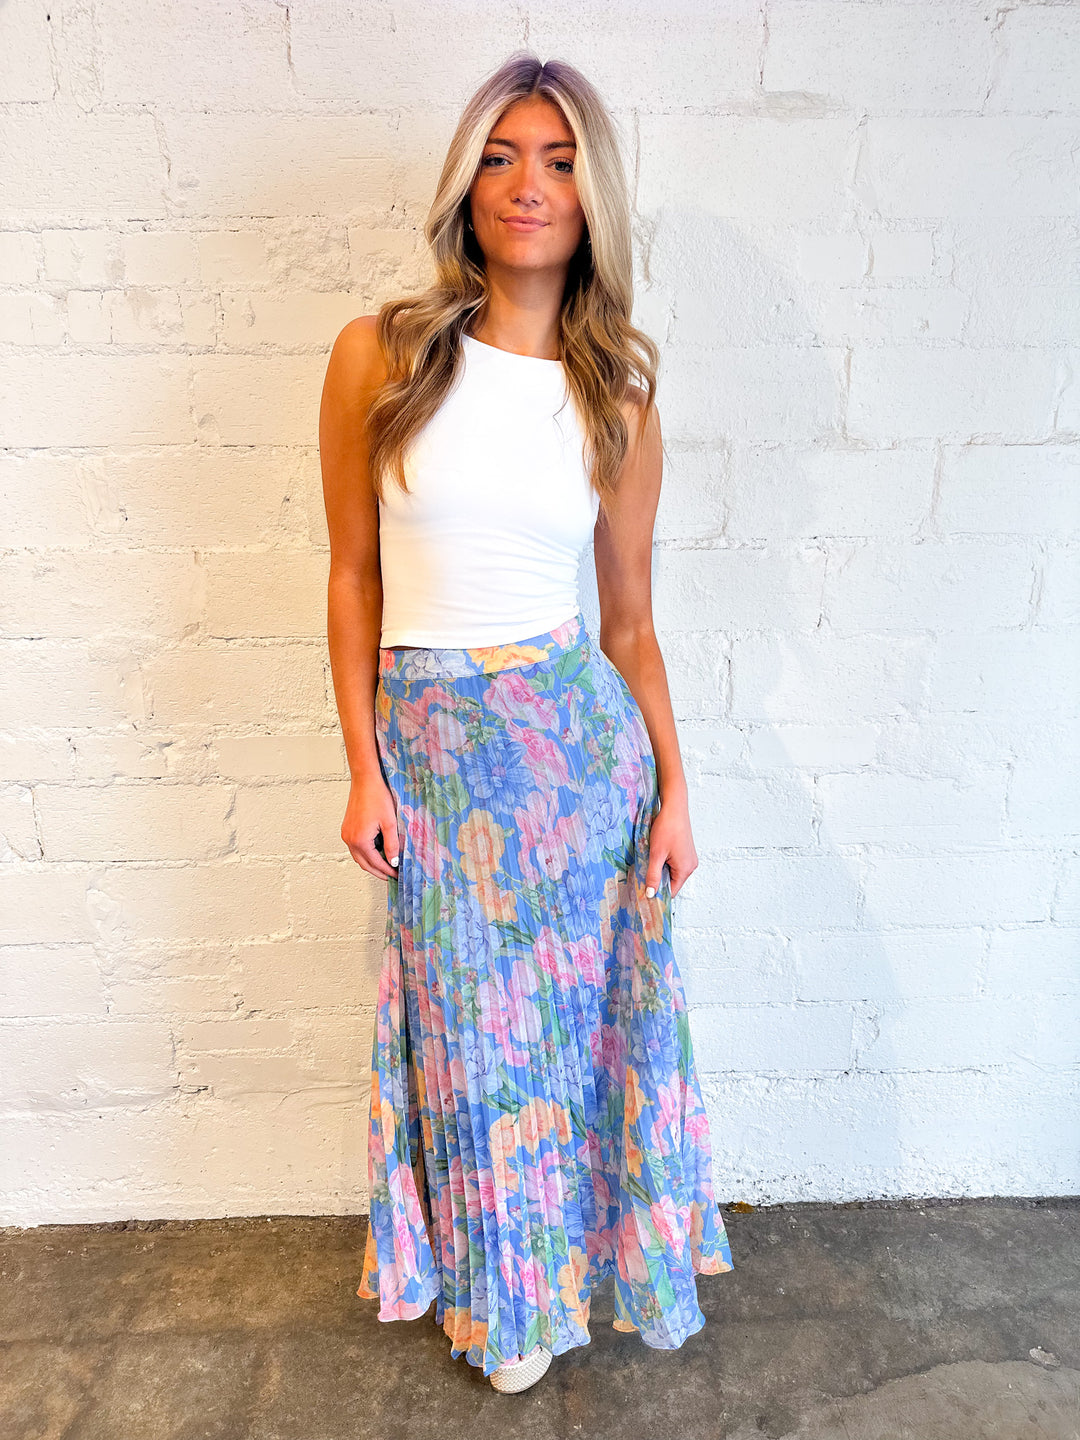 Spring Showers Maxi Skirt, Skirts, Olivaceous, Adeline, dallas boutique, dallas texas, texas boutique, women's boutique dallas, adeline boutique, dallas boutique, trendy boutique, affordable boutique